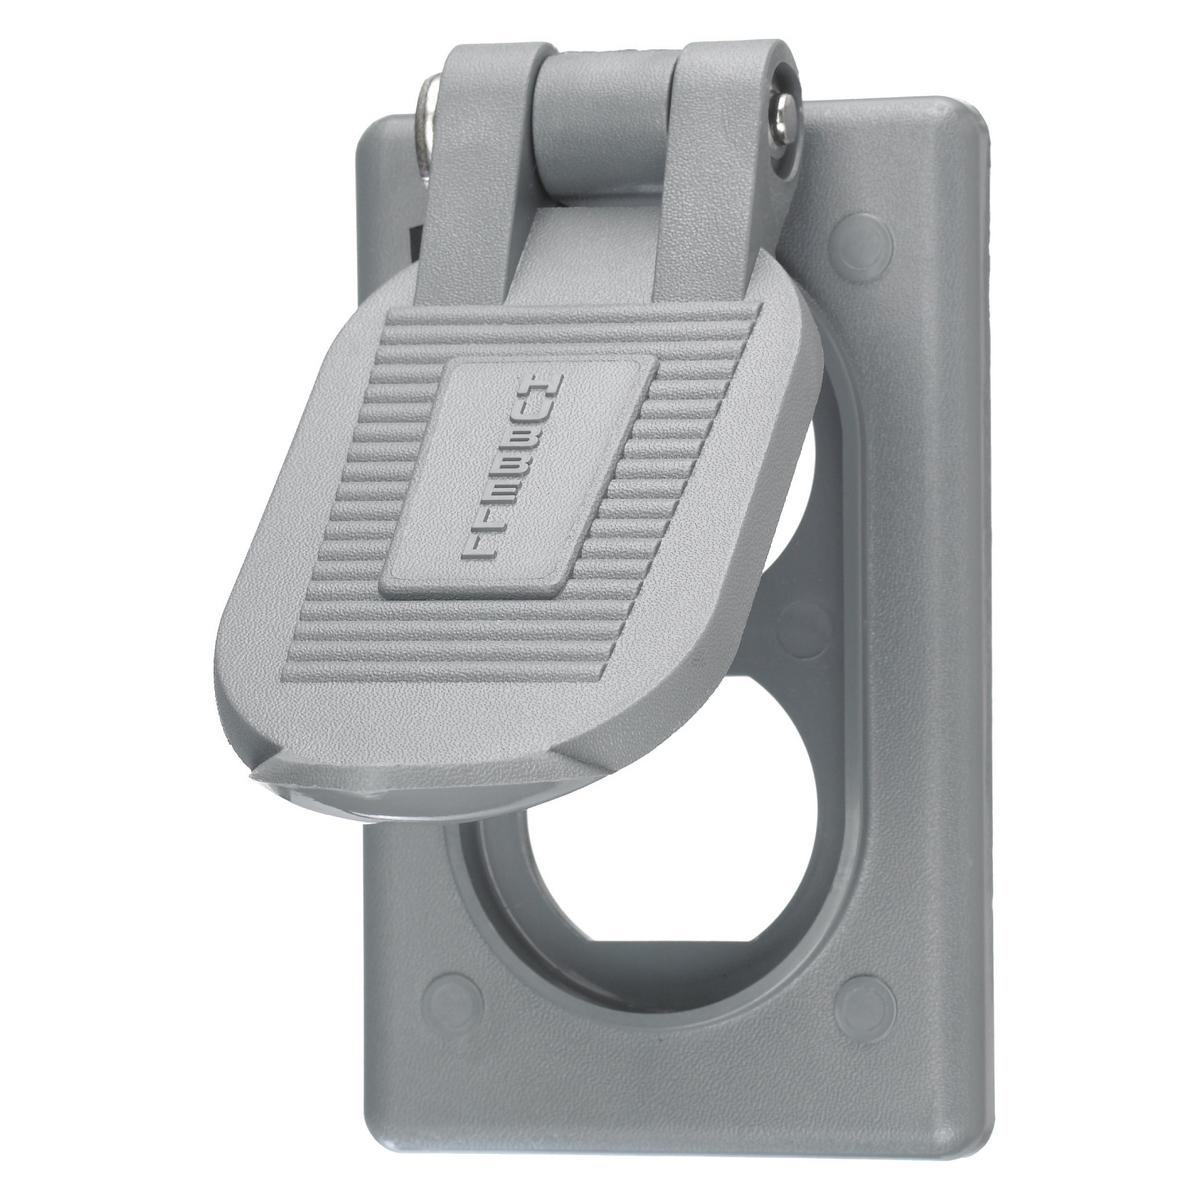 Hubbell HBL5222 Twist-Lock® Devices, Weatherproof Covers, Accessories for 15 Amp 2 and 3 Wire Devices, Gray thermoplastic, vertical standard box mount, corrosion resistant  ; Standard Product, Marine Grade